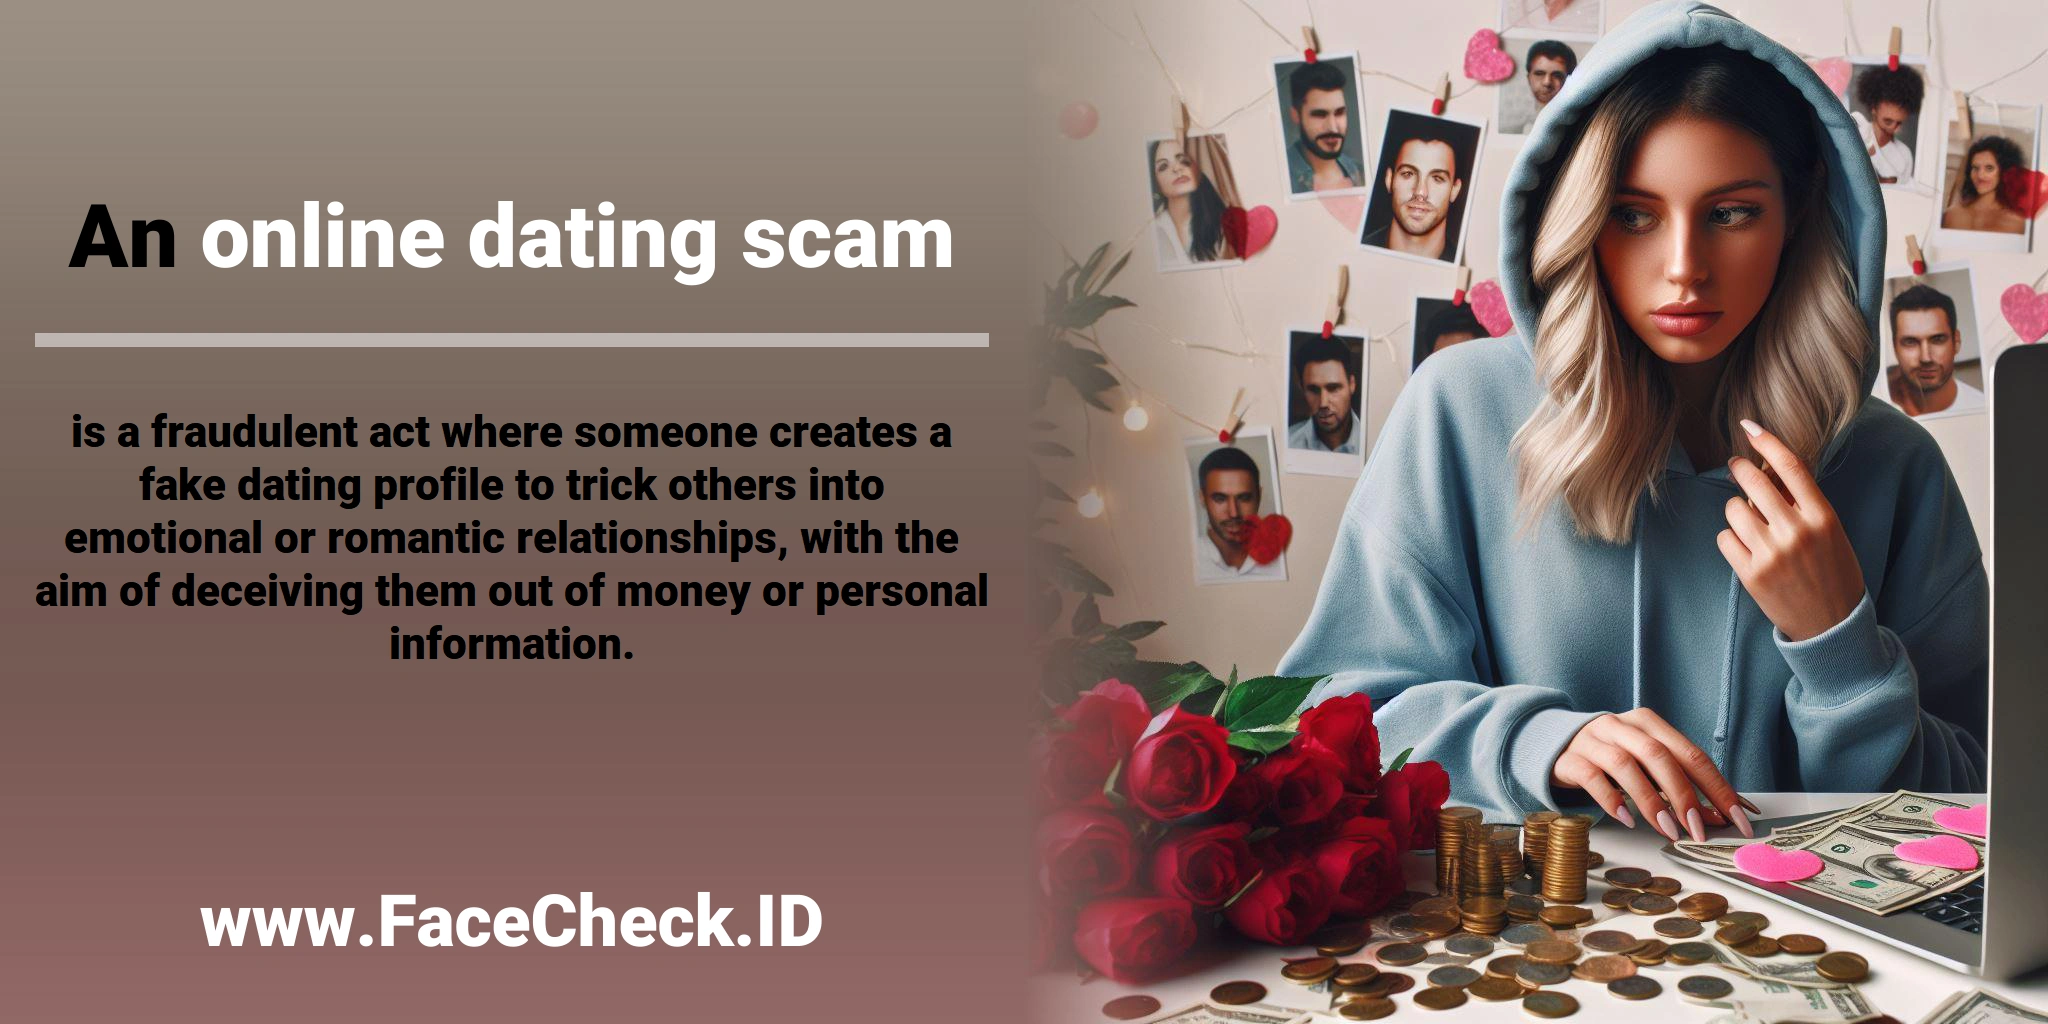 An <b>online dating scam</b> is a fraudulent act where someone creates a fake dating profile to trick others into emotional or romantic relationships, with the aim of deceiving them out of money or personal information.